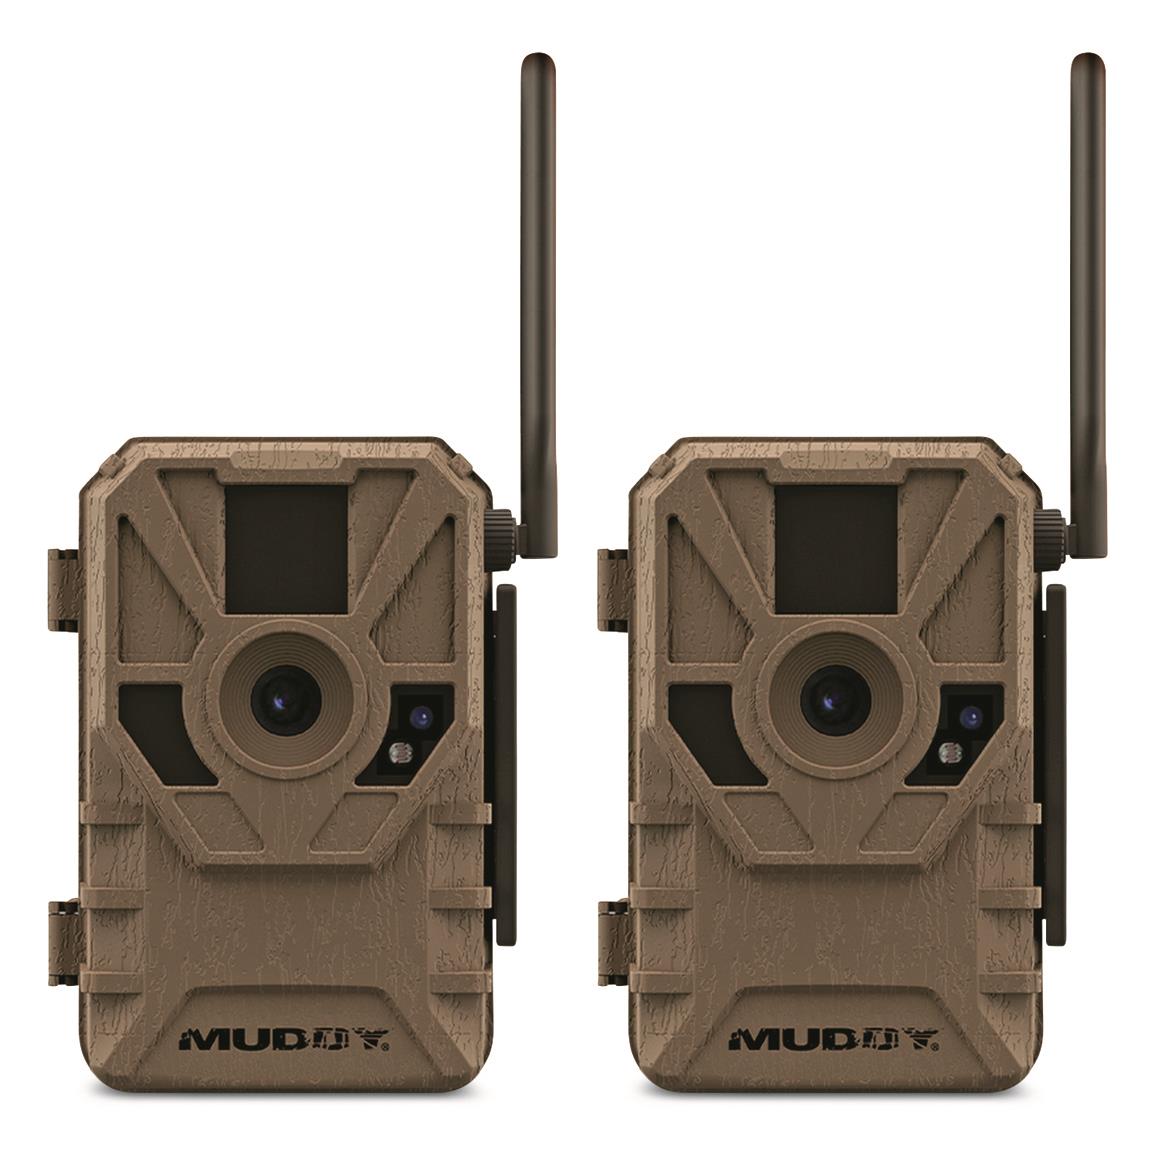 Muddy Manifest 2.0 Cellular Trail/Game Camera, 2 Pack, At&t